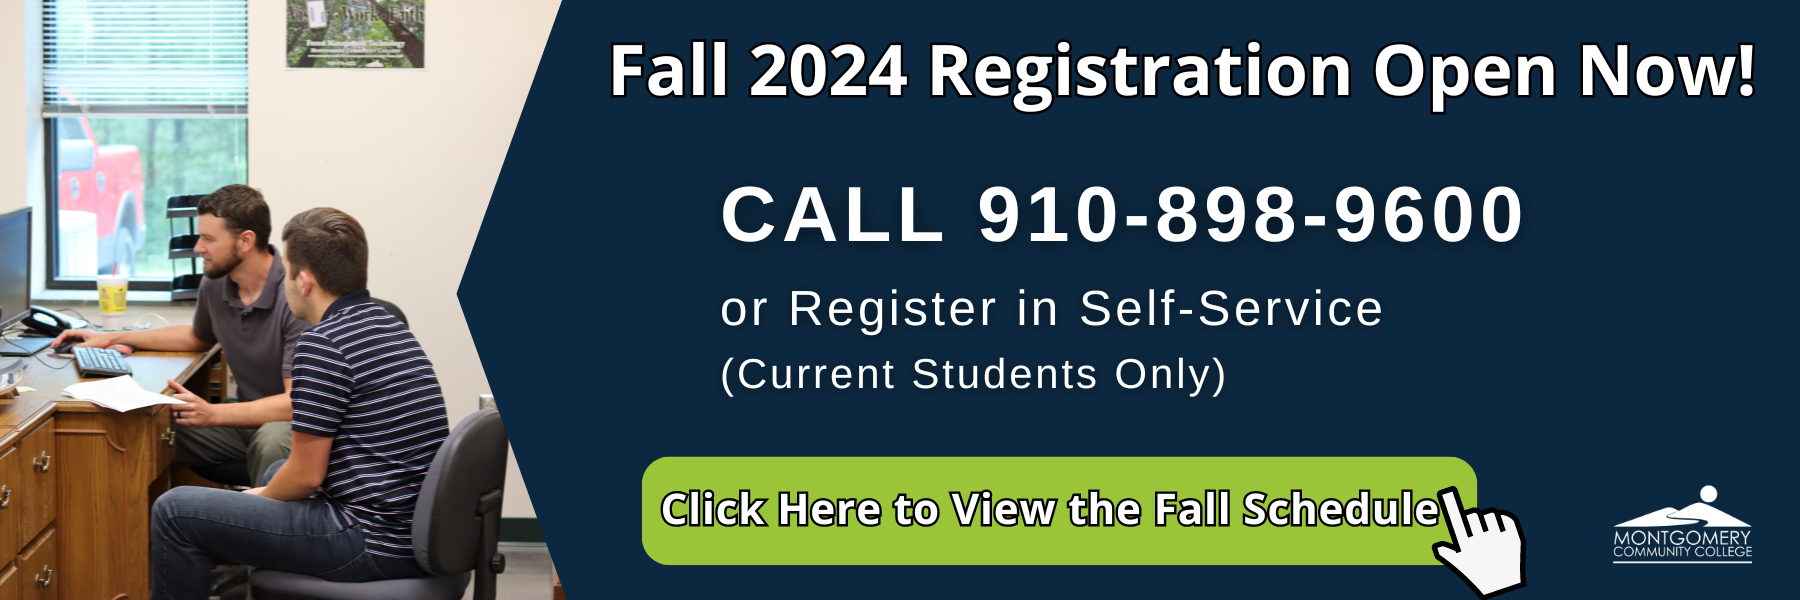 Fall 2024 Registration Open Now! Call 910-898-9600 or Register in Self-Service  (Current Students Only)